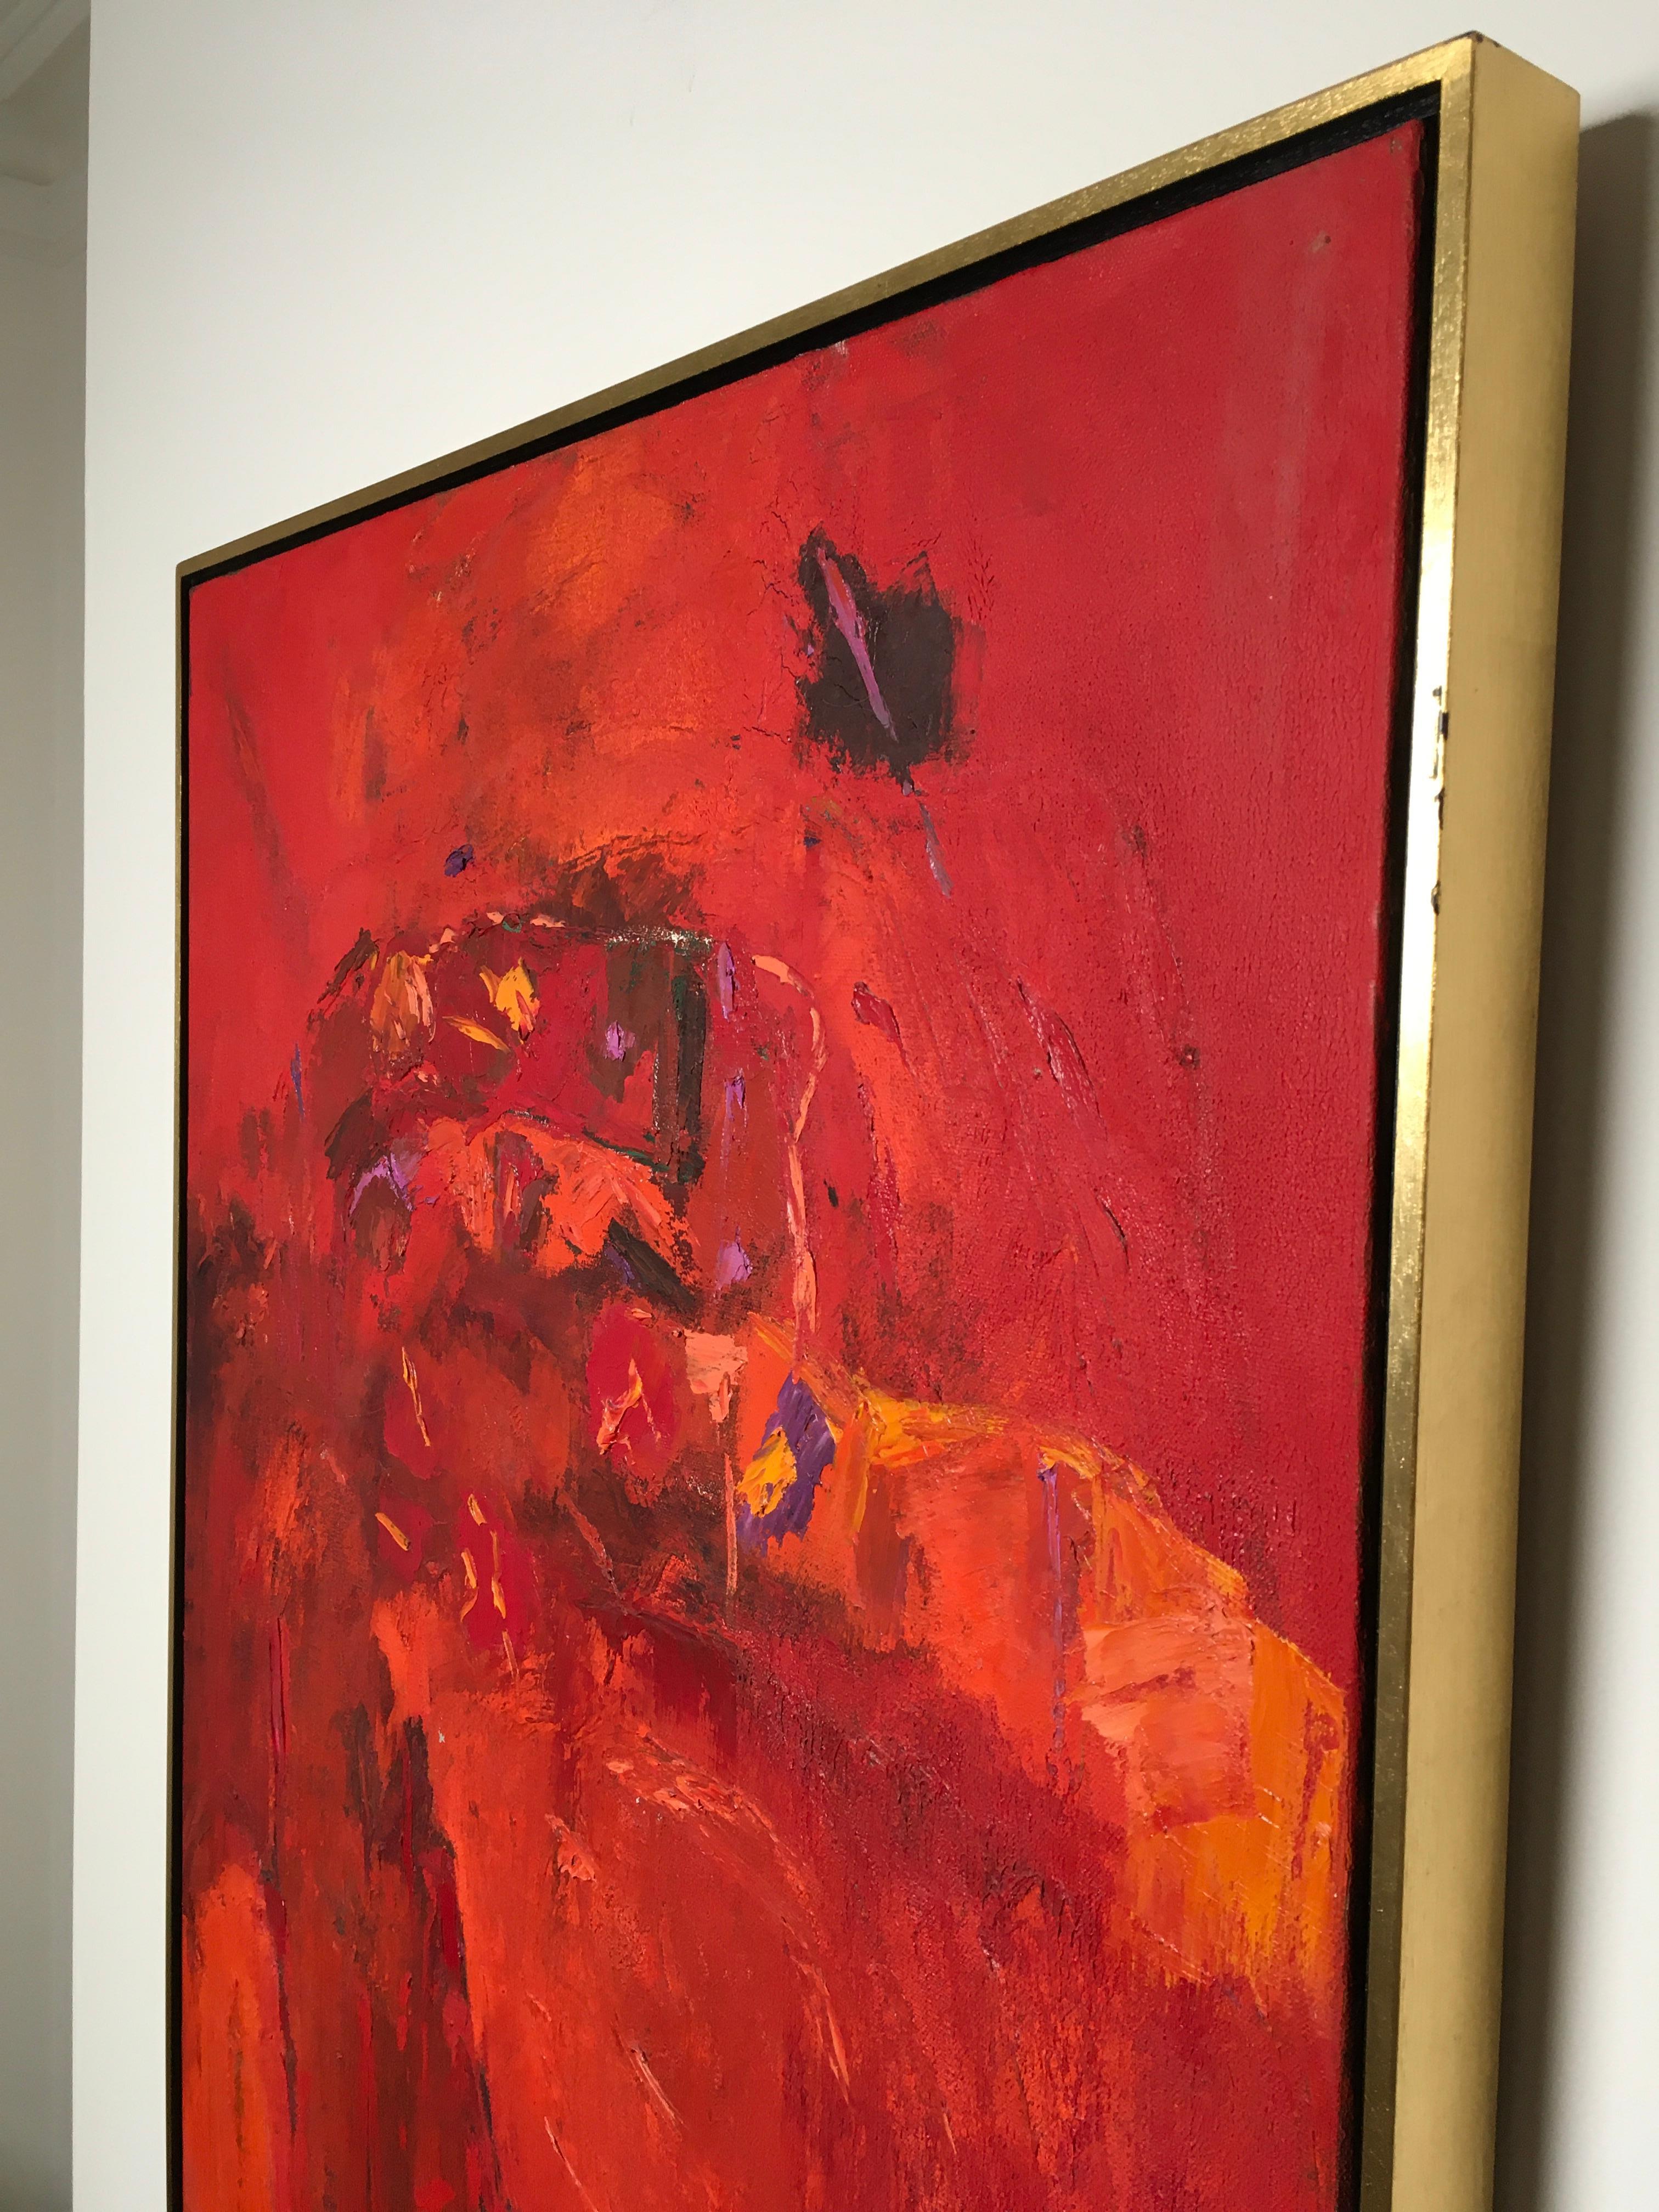 Large Oil on Canvas by Beverley Downie 1978 Red Abstract Expressionist In Good Condition For Sale In Melbourne, AU